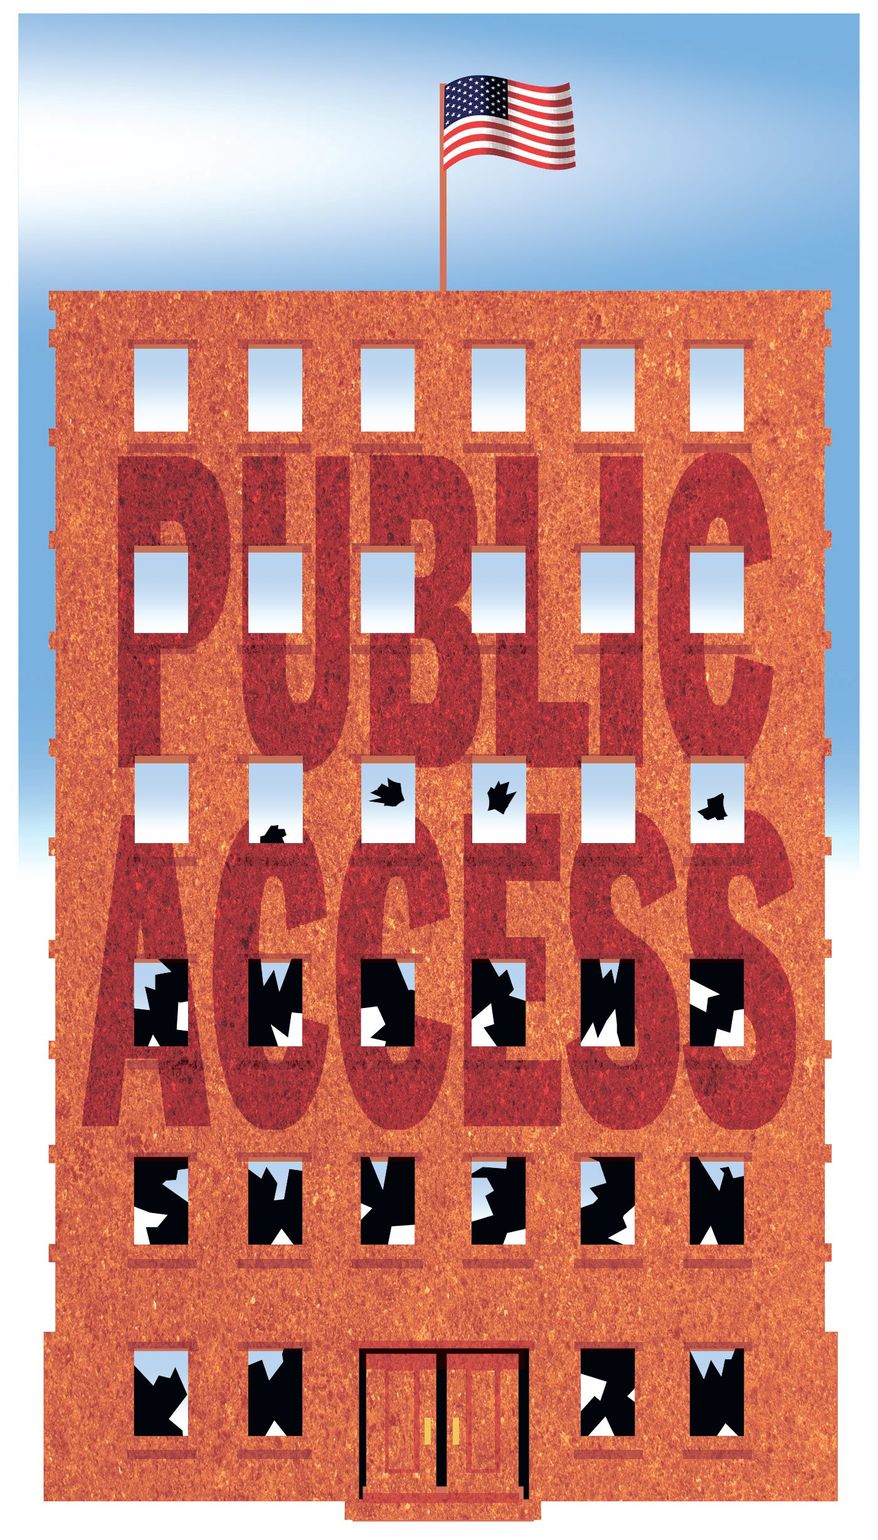 Illustration on the causes of declining public access by Alexander Hunter/The Washington Times